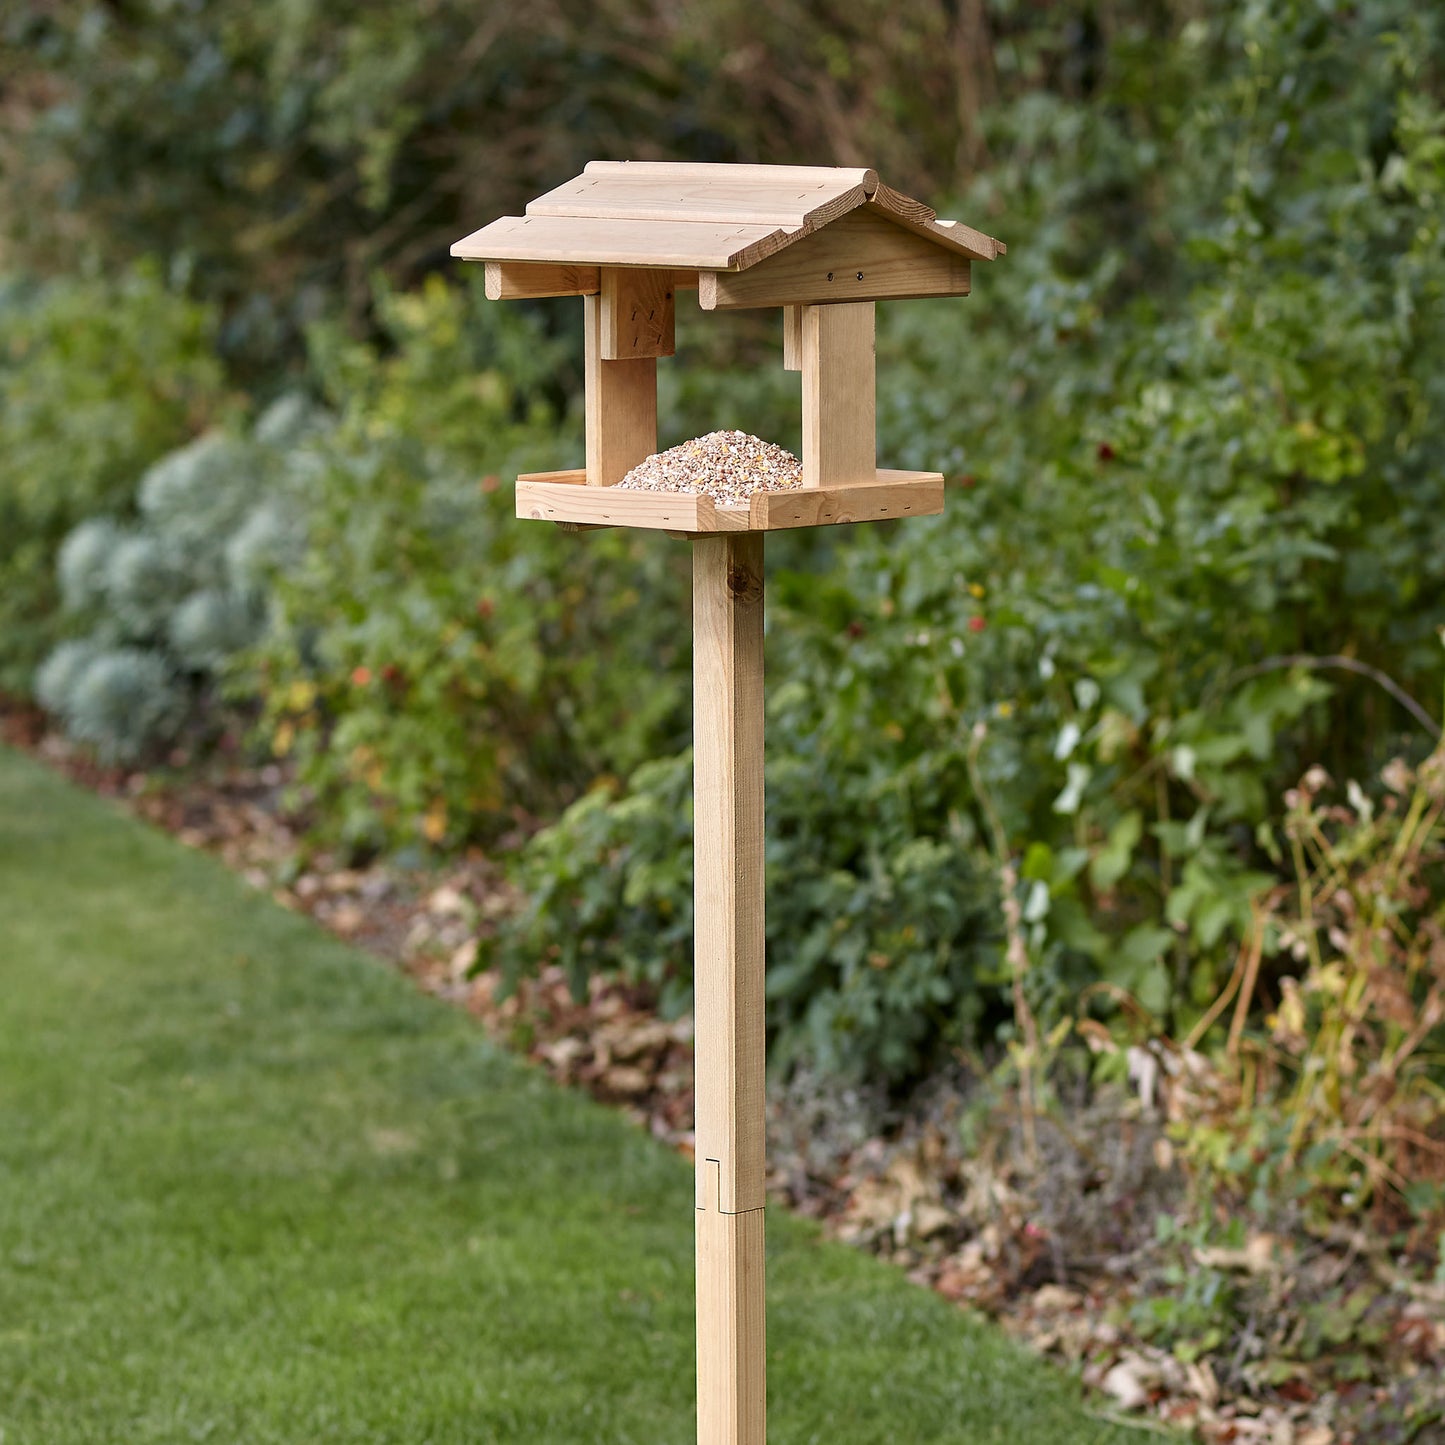 Peckish Everyday Garden Bird Table with seed mix on